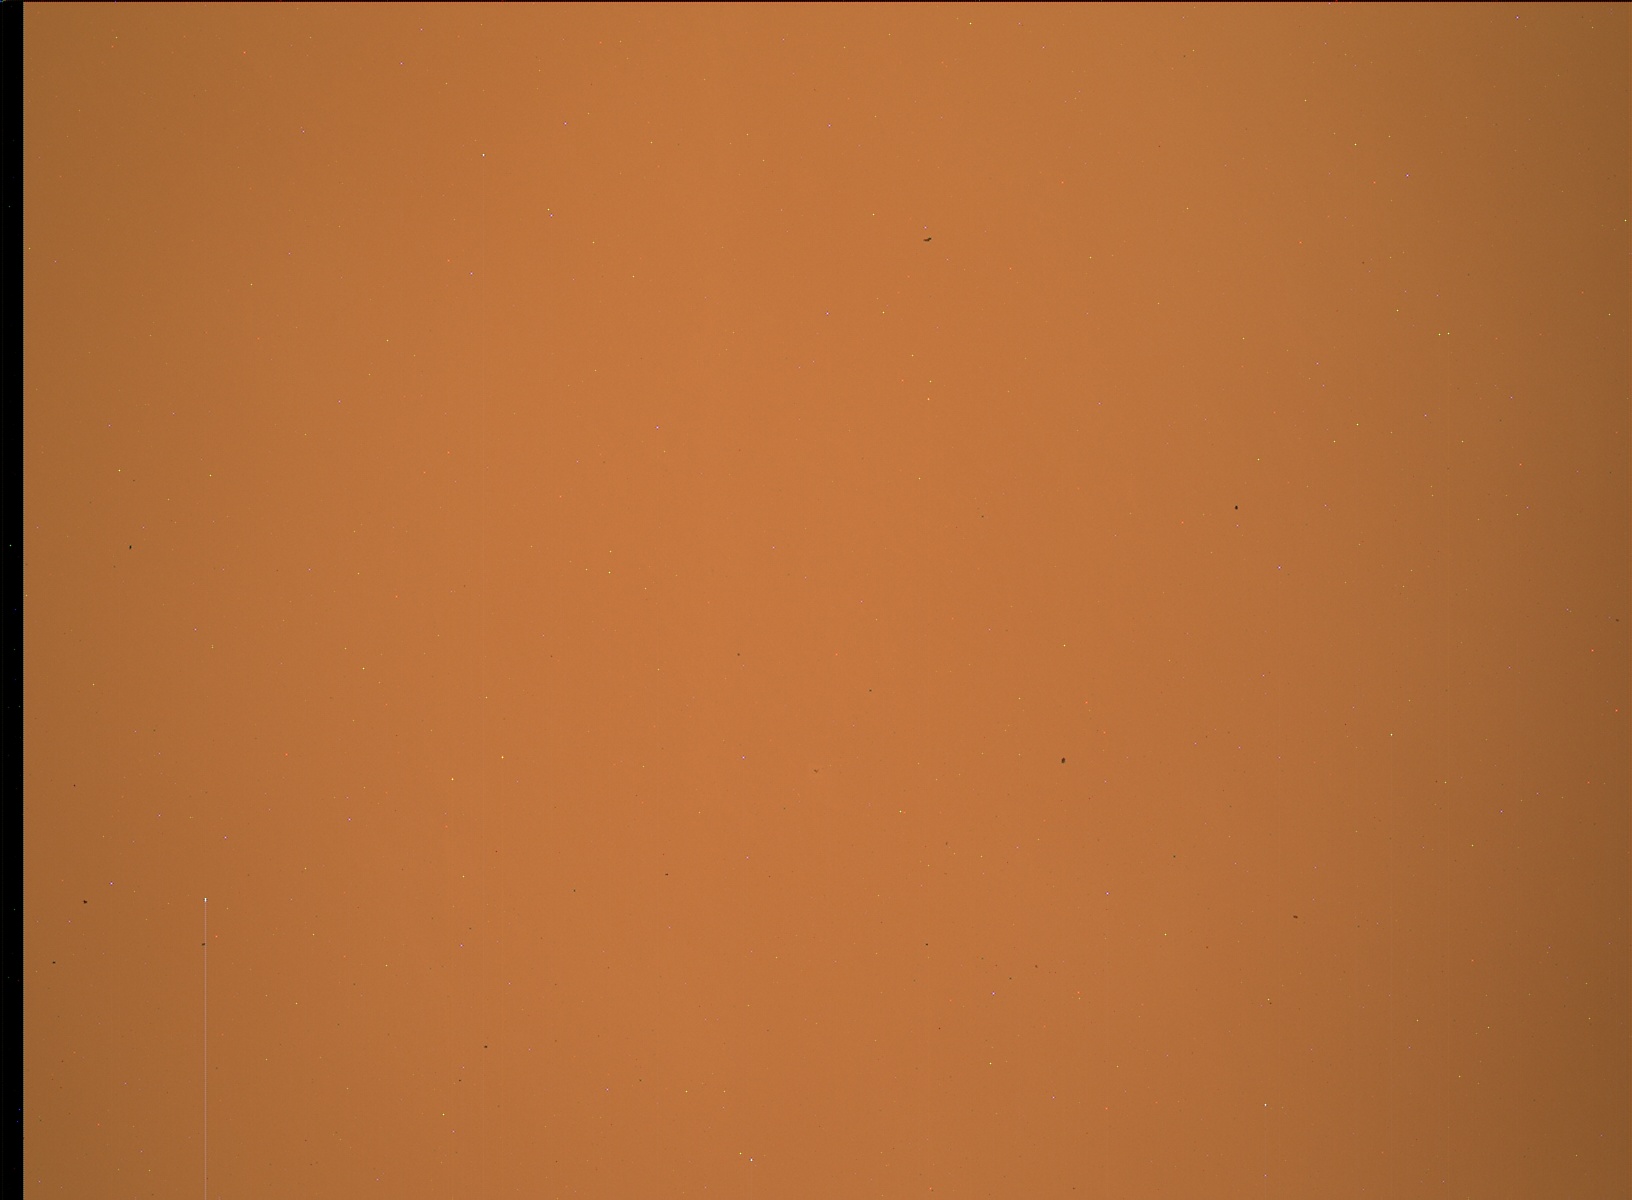 Nasa's Mars rover Curiosity acquired this image using its Mars Hand Lens Imager (MAHLI) on Sol 3330